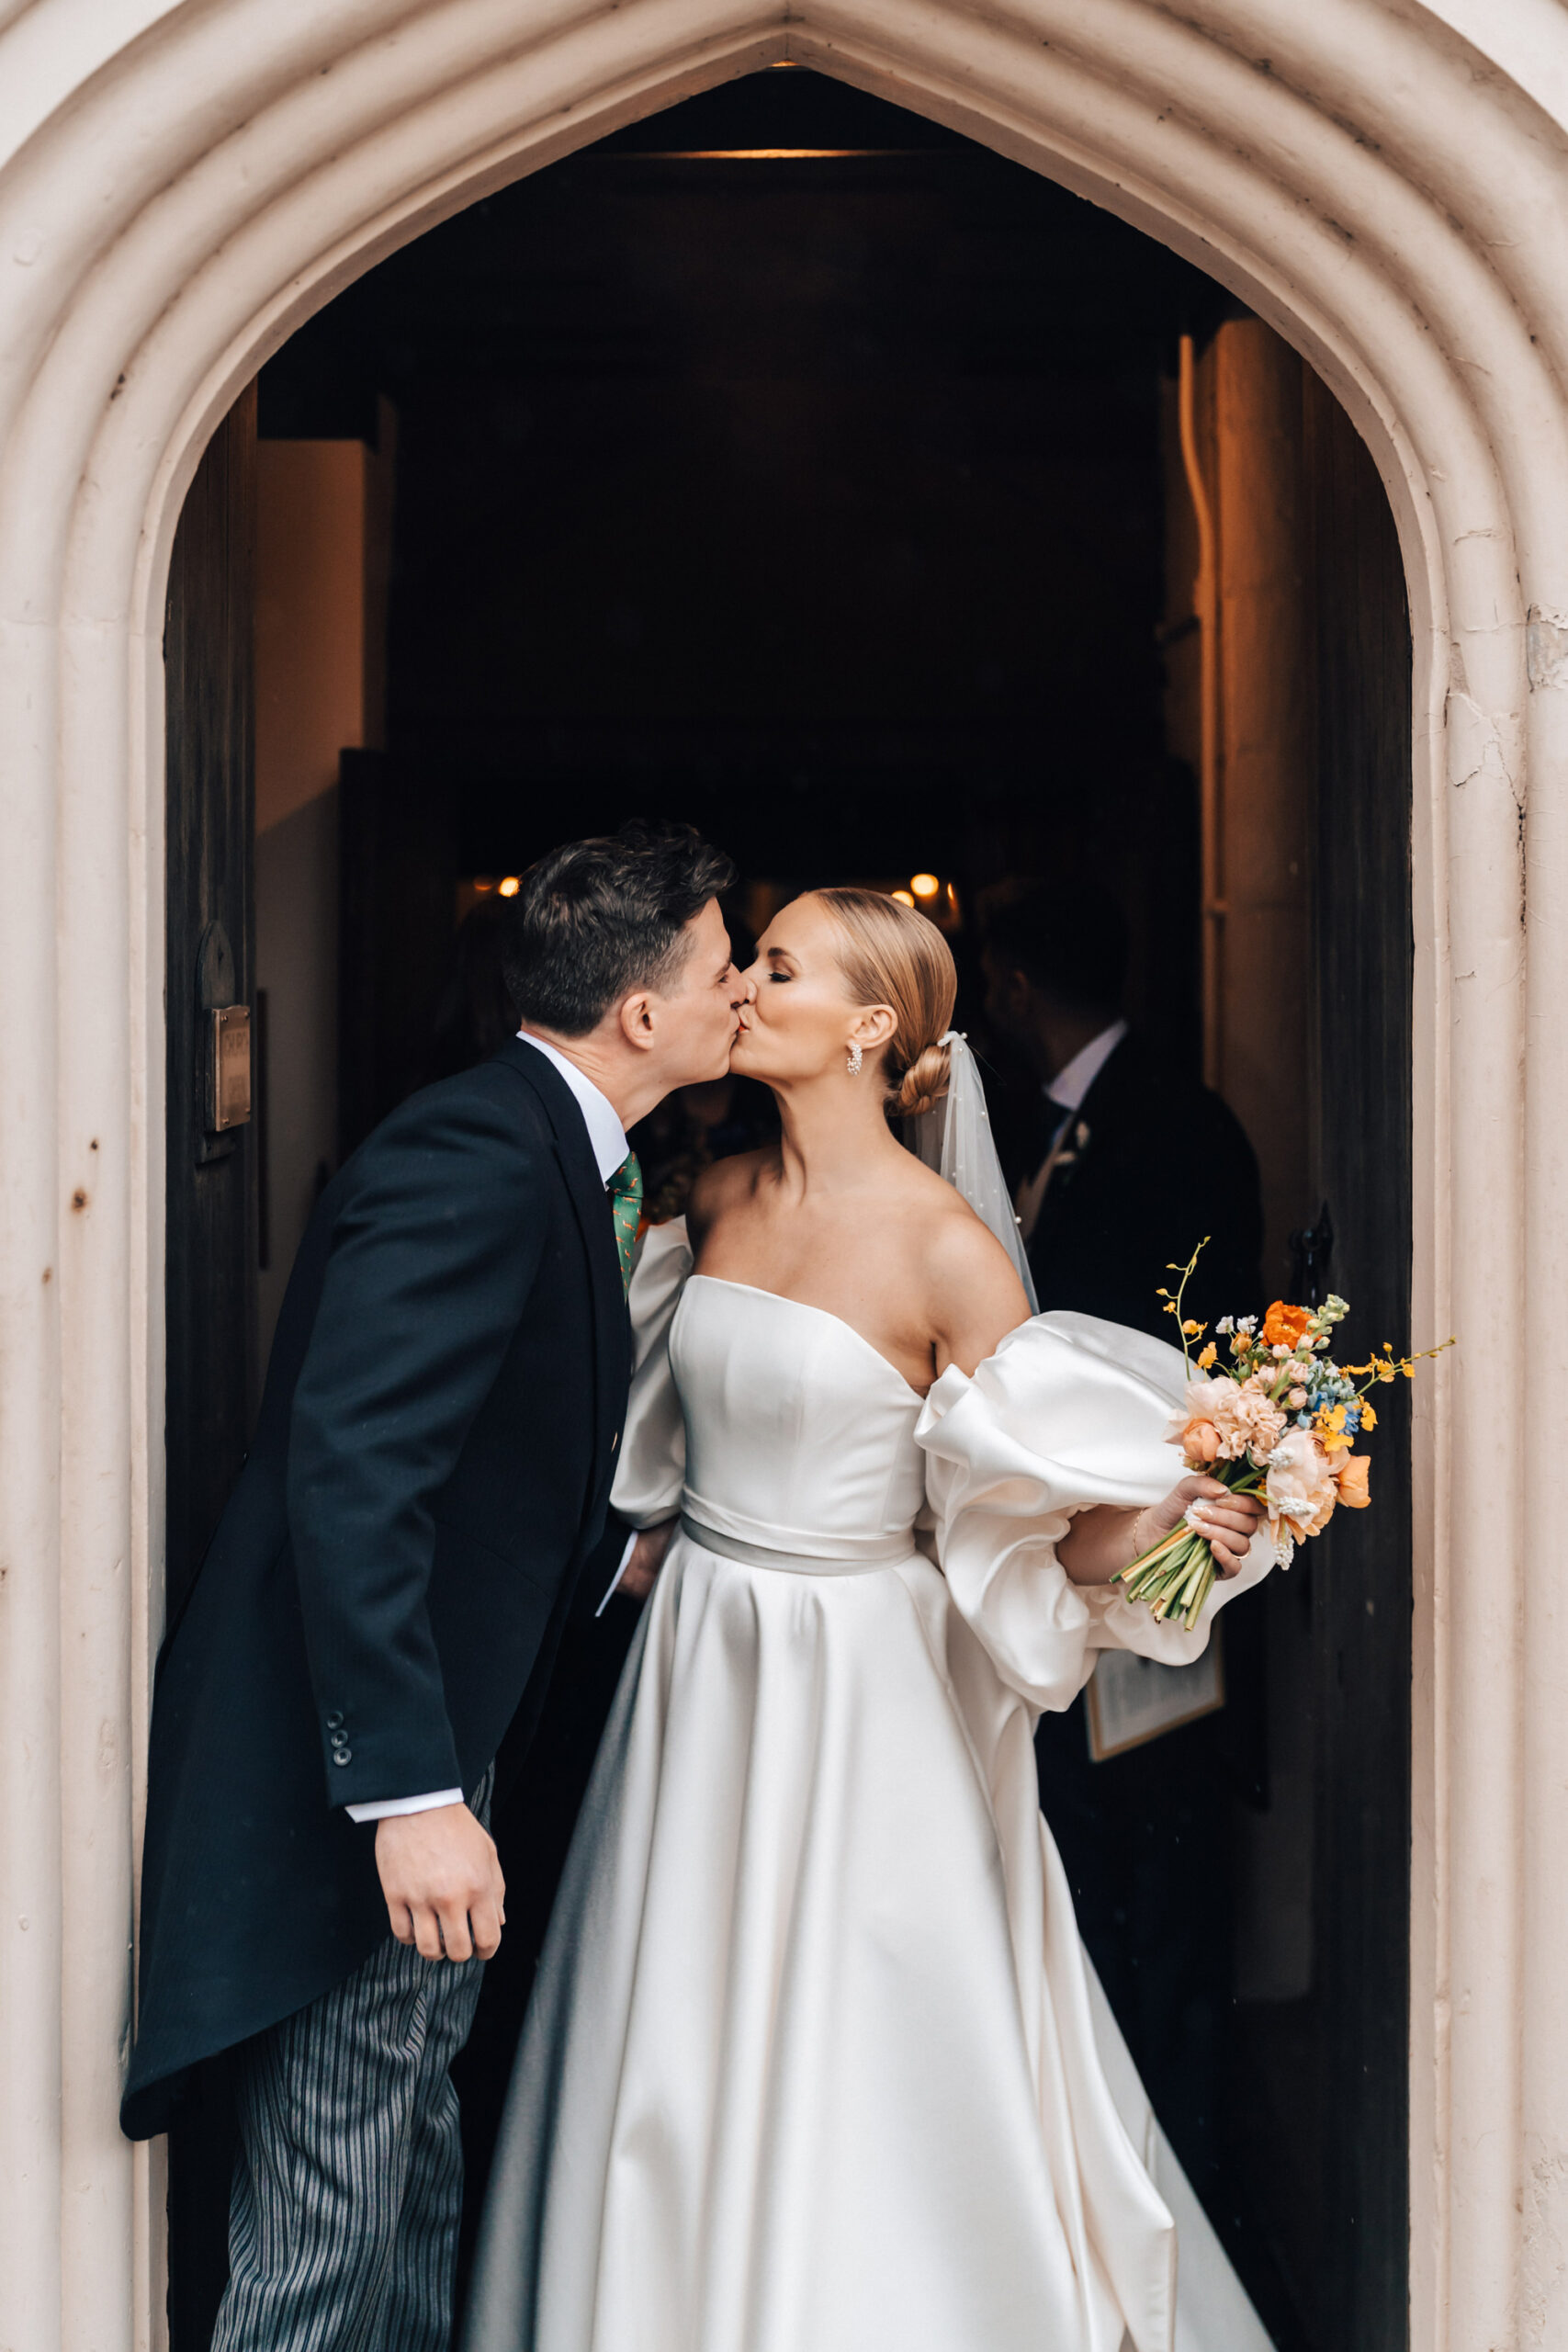 A bride and groom kissing at a church door after getting married